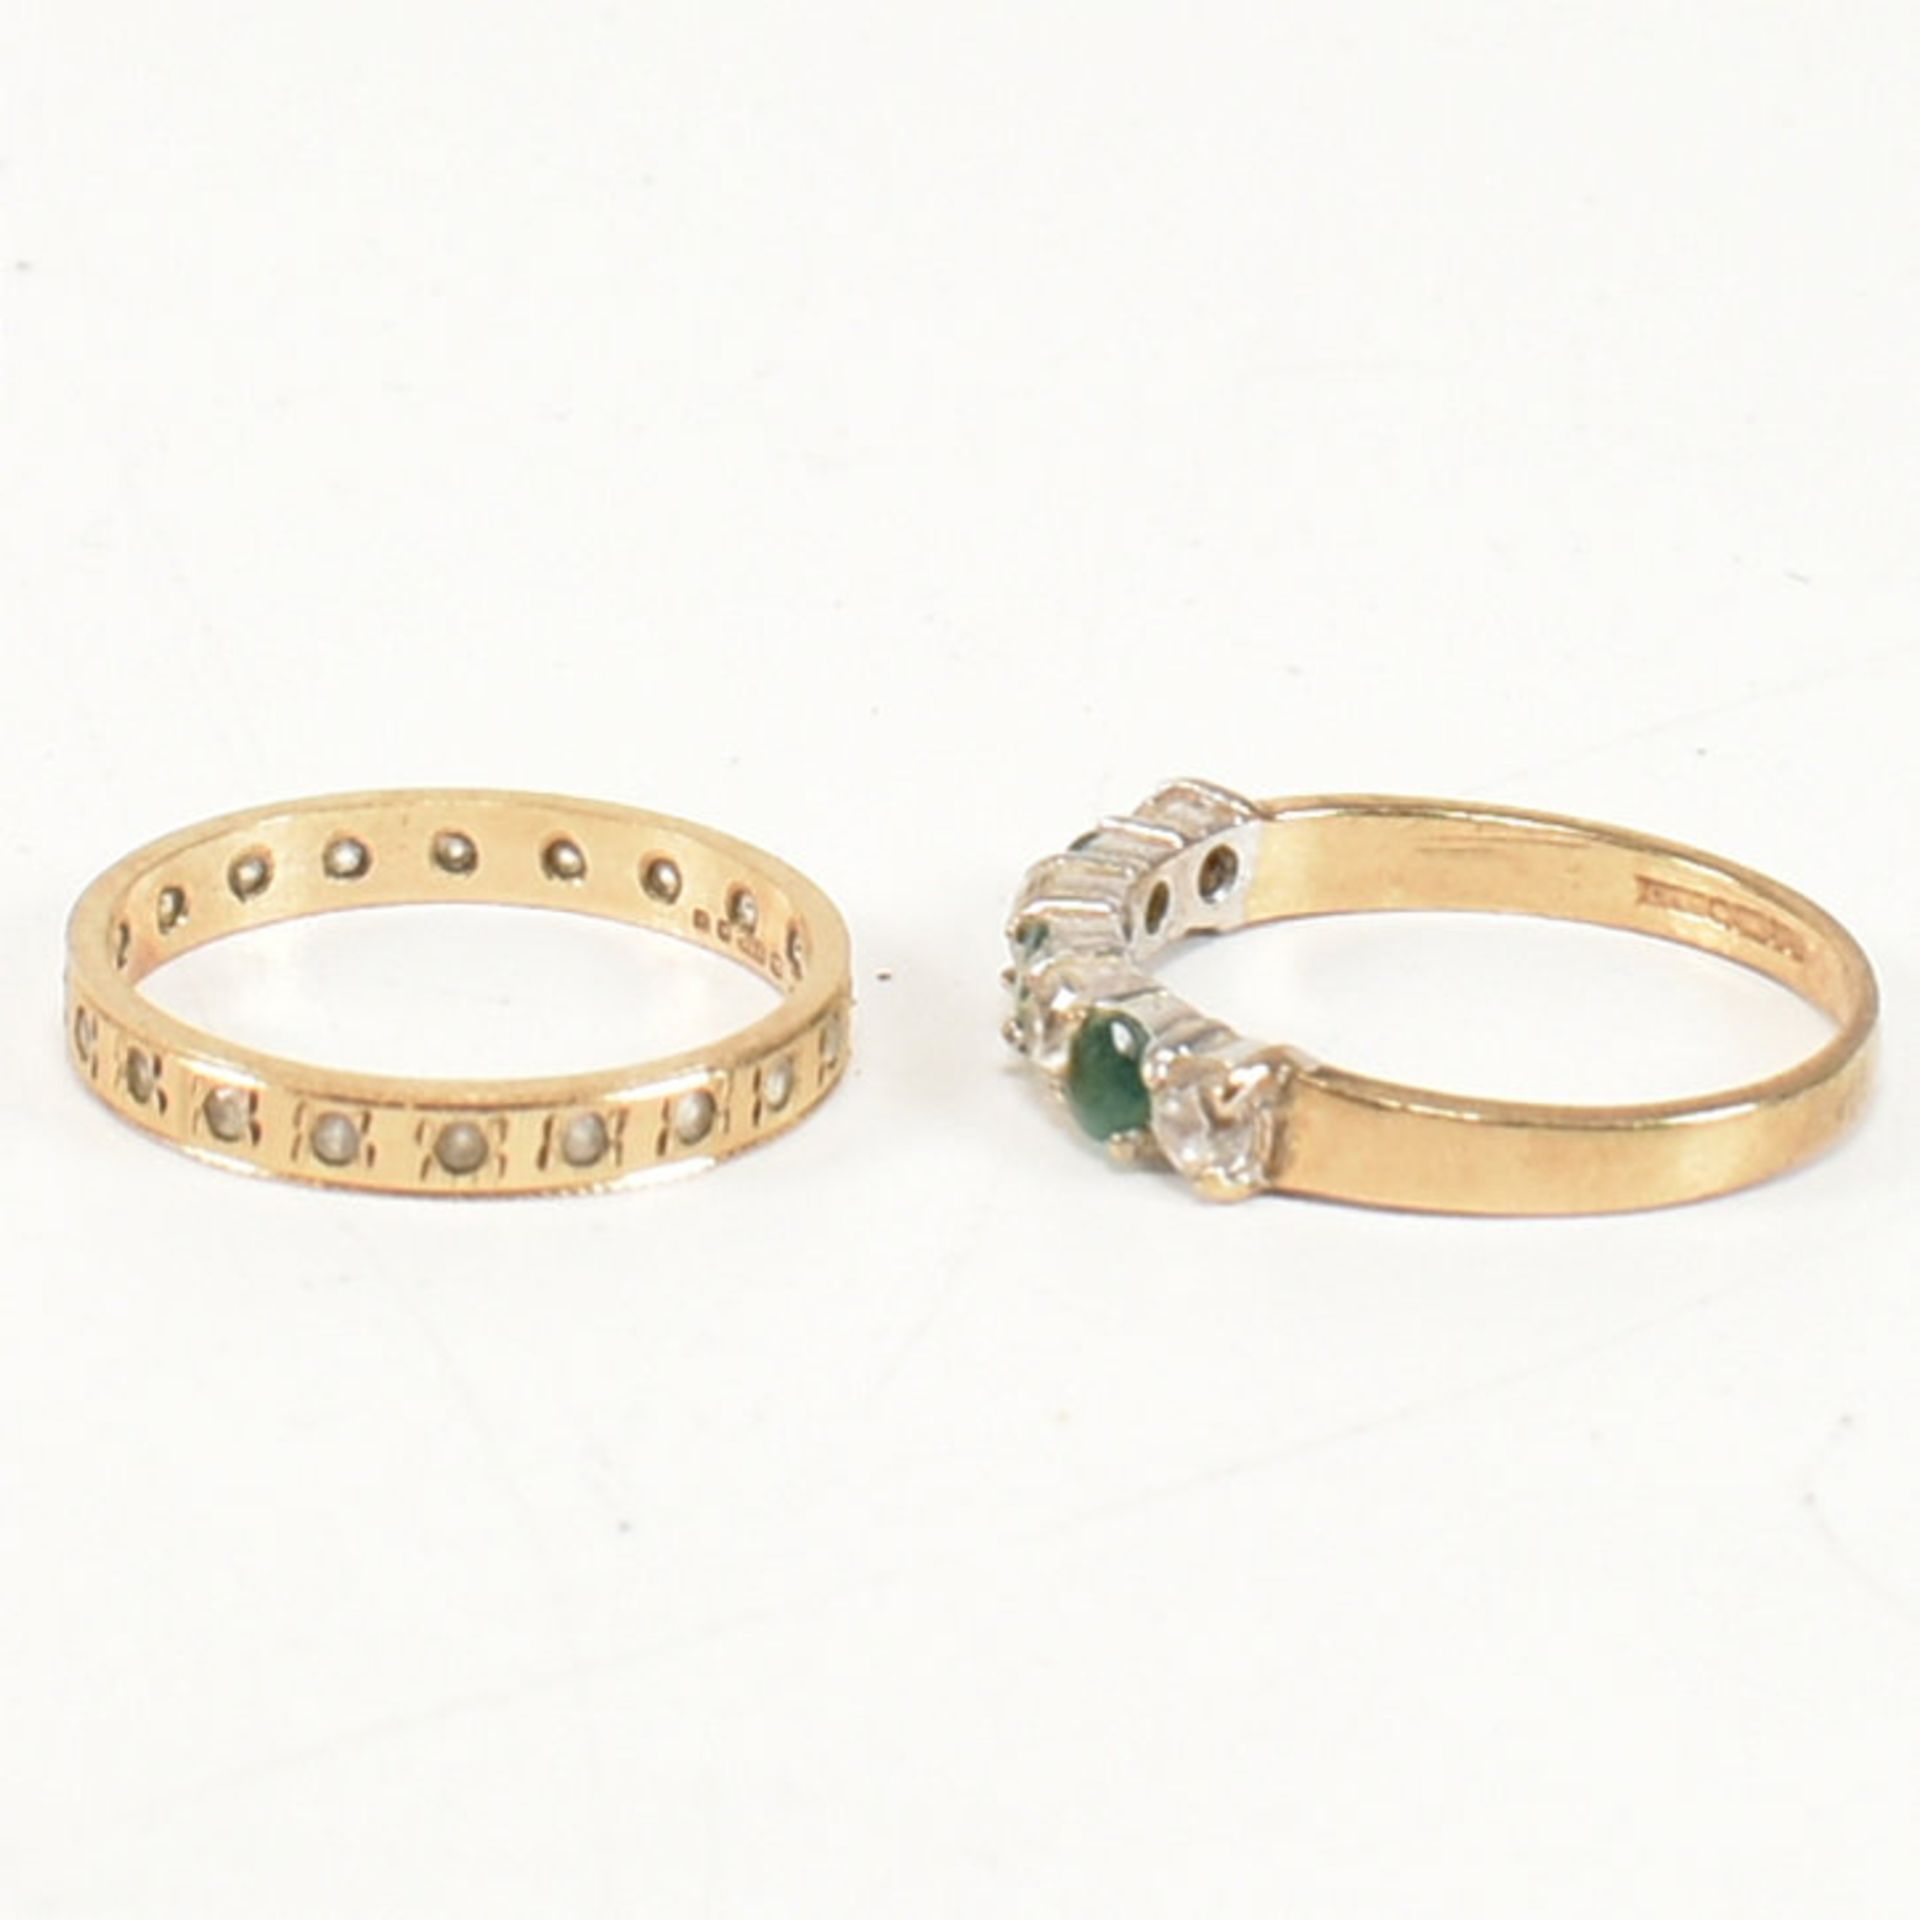 TWO HALLMARKED 9CT GOLD GEM SET RINGS - Image 4 of 11